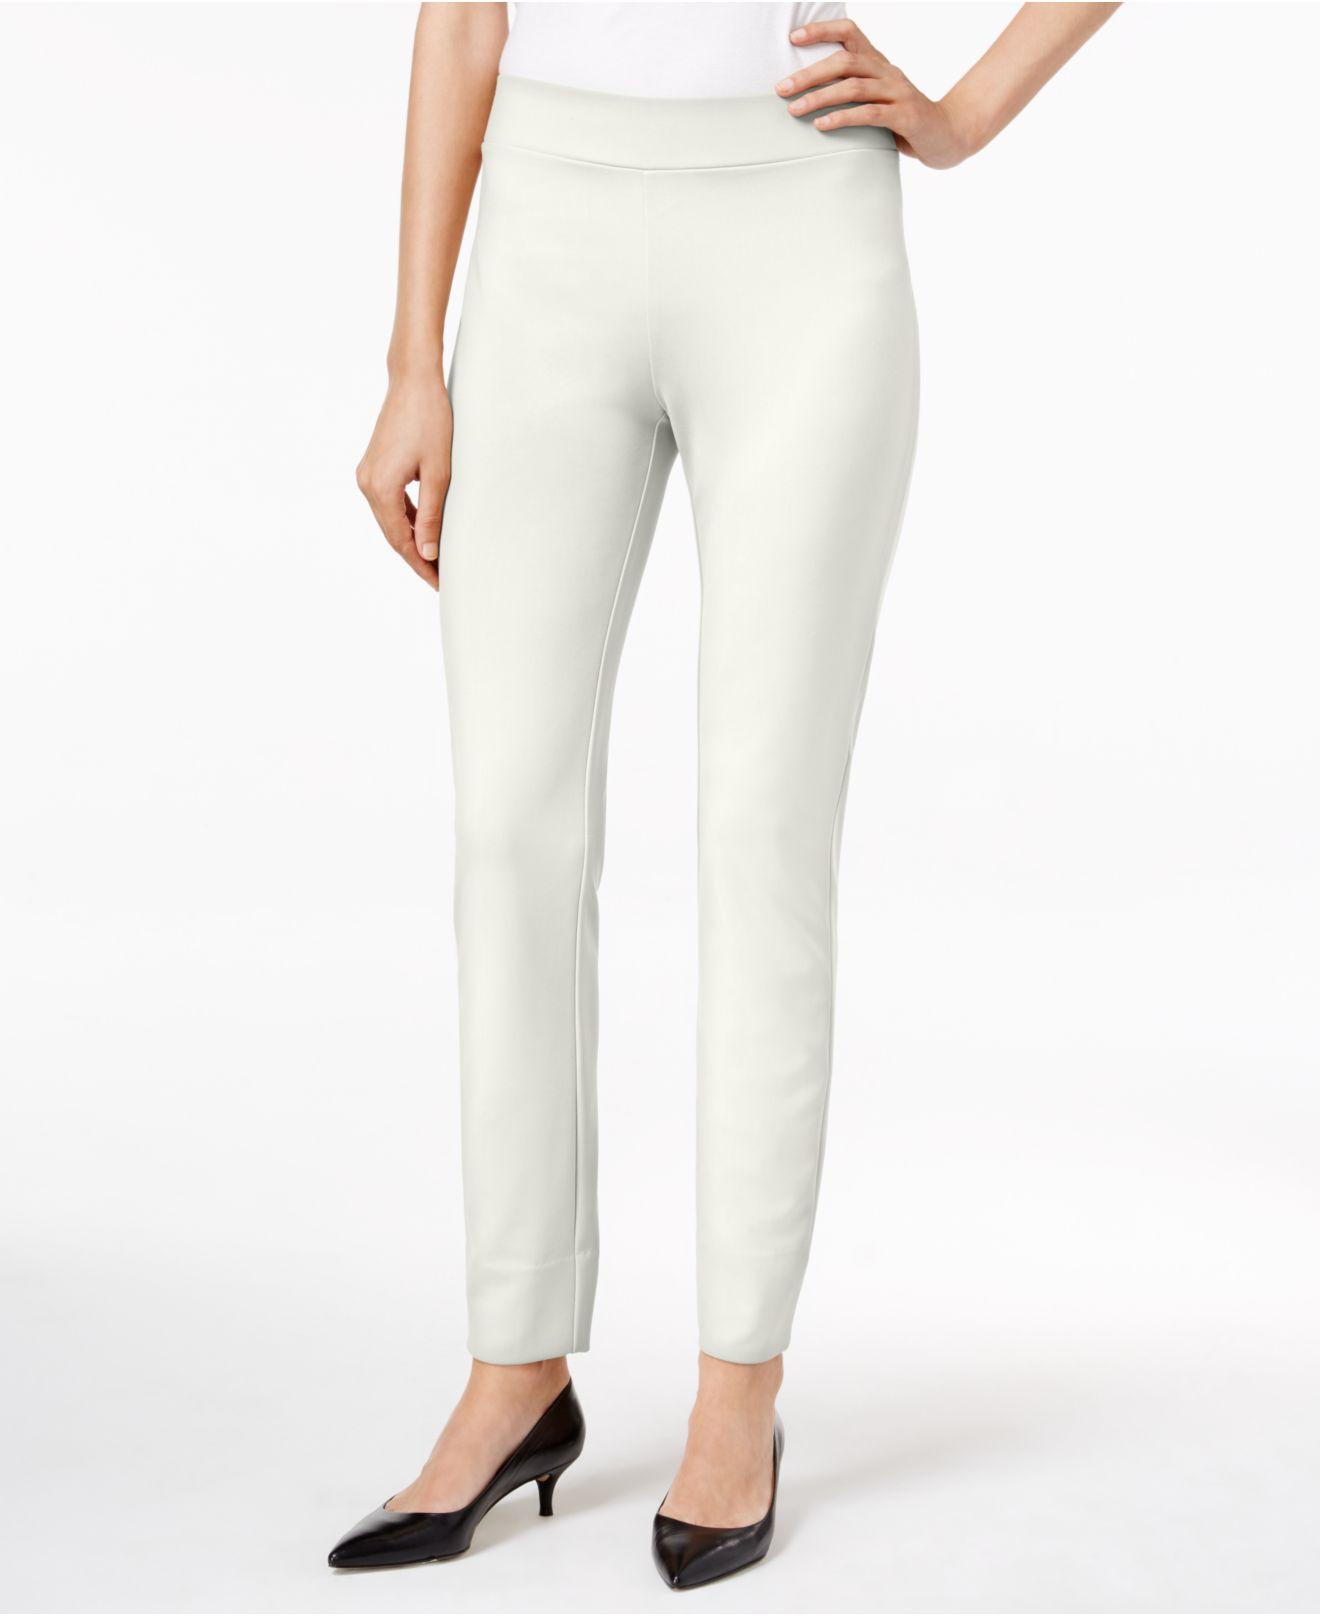 Lyst - Eci Pull-on Straight-leg Pants in White